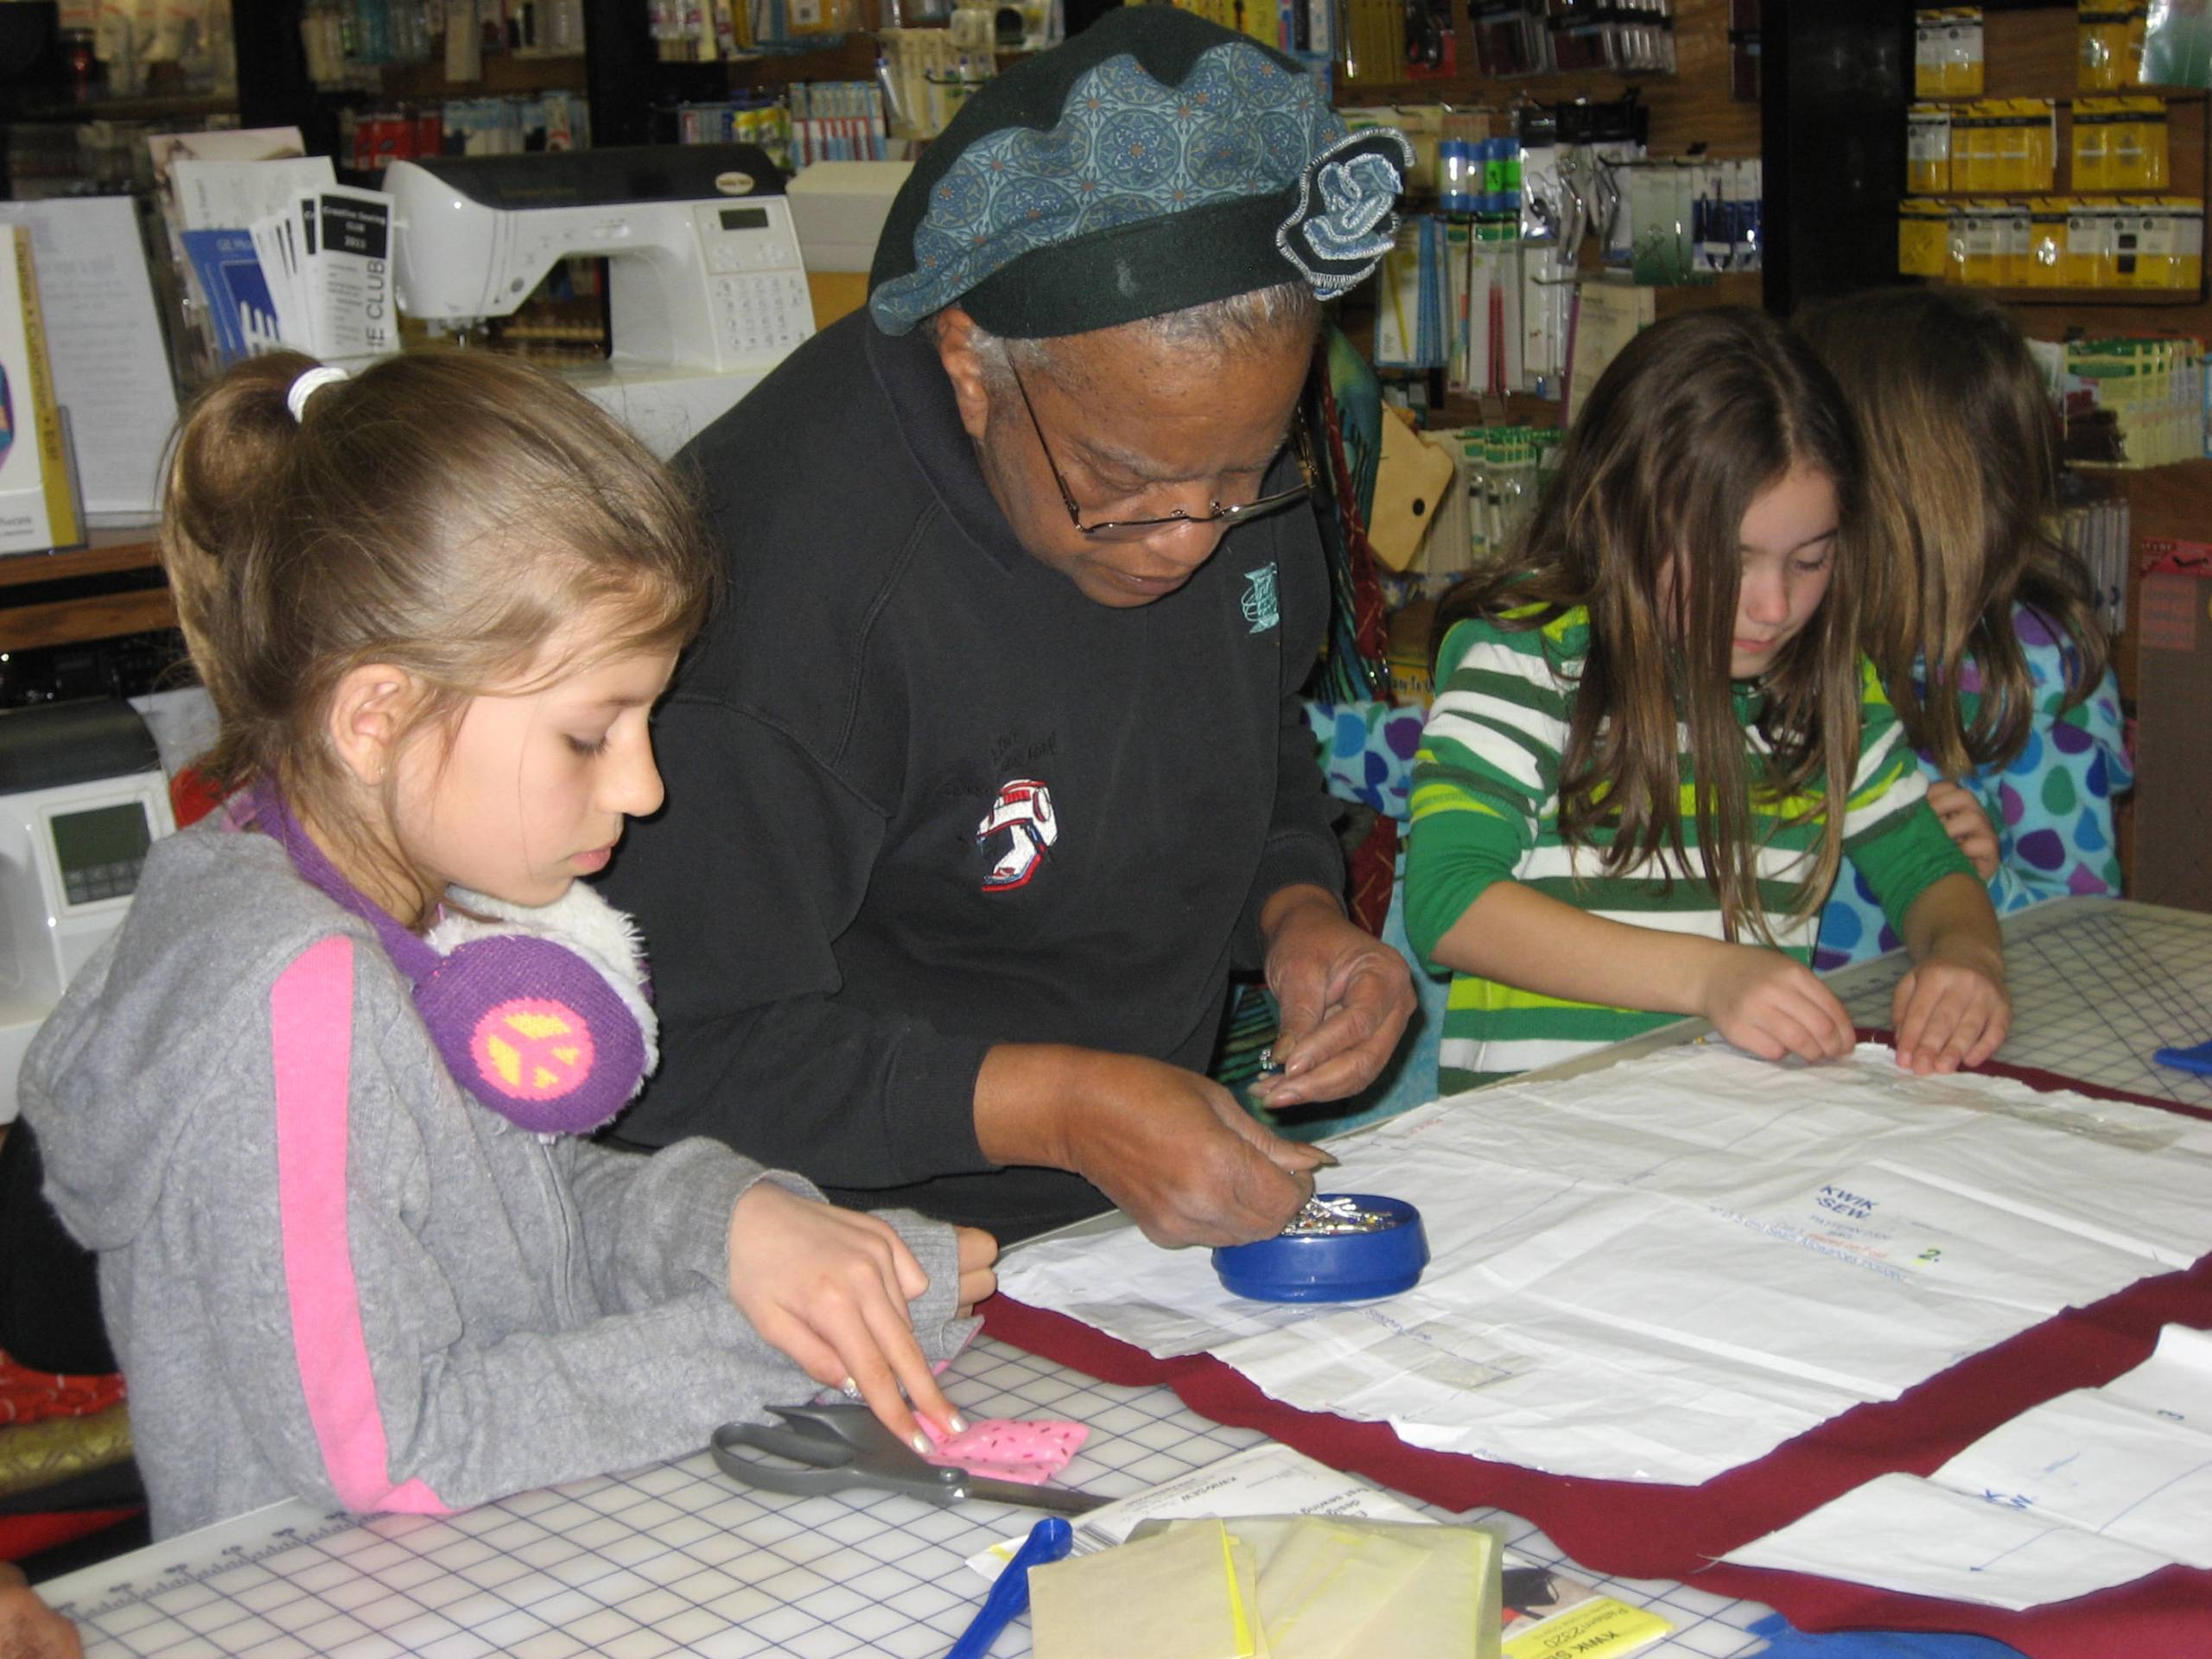 Older Black woman works with two kids to pin pattern to red fabric